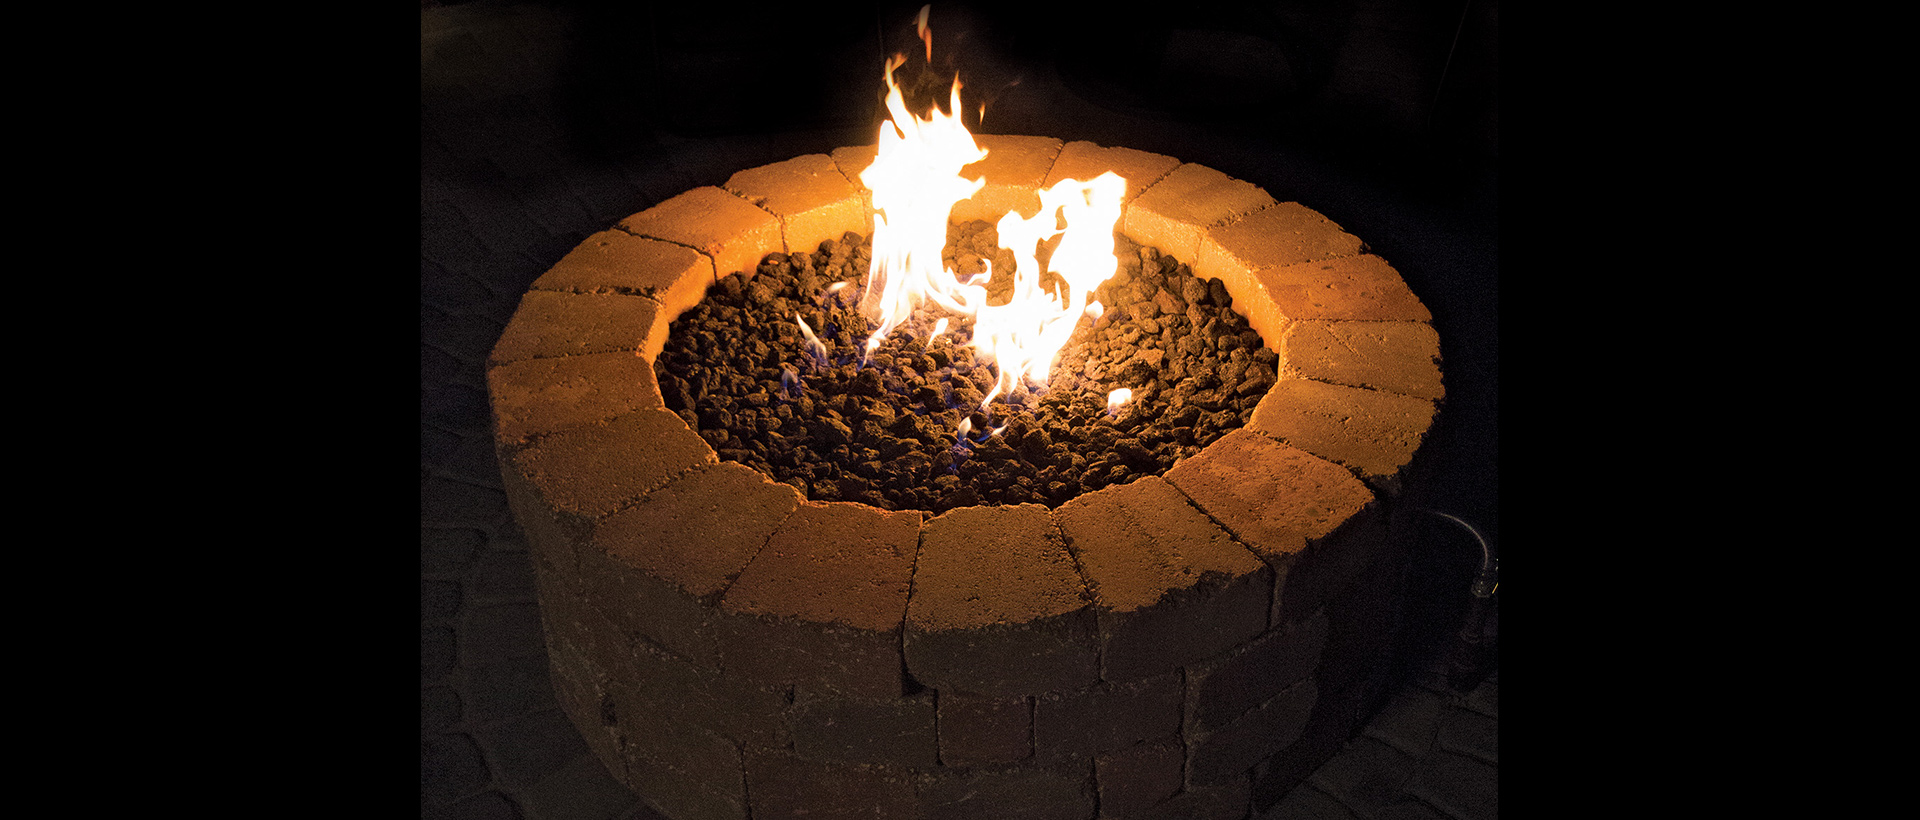 Grand Gas Fire Ring Kit Rockwood, Gas Fire Rings For Fire Pits